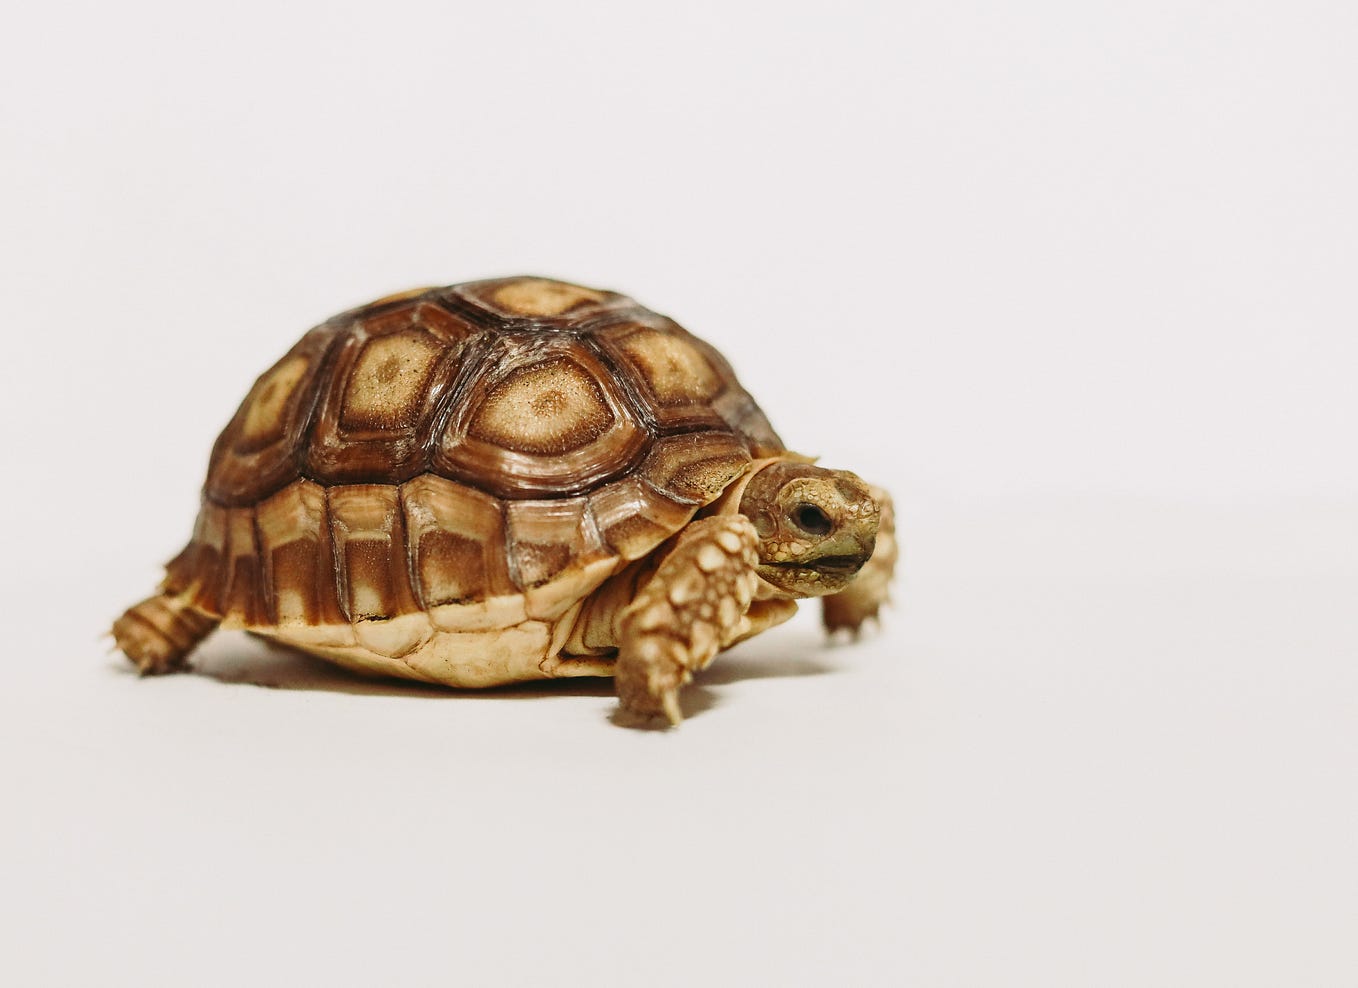 A brown turtle on a white background.